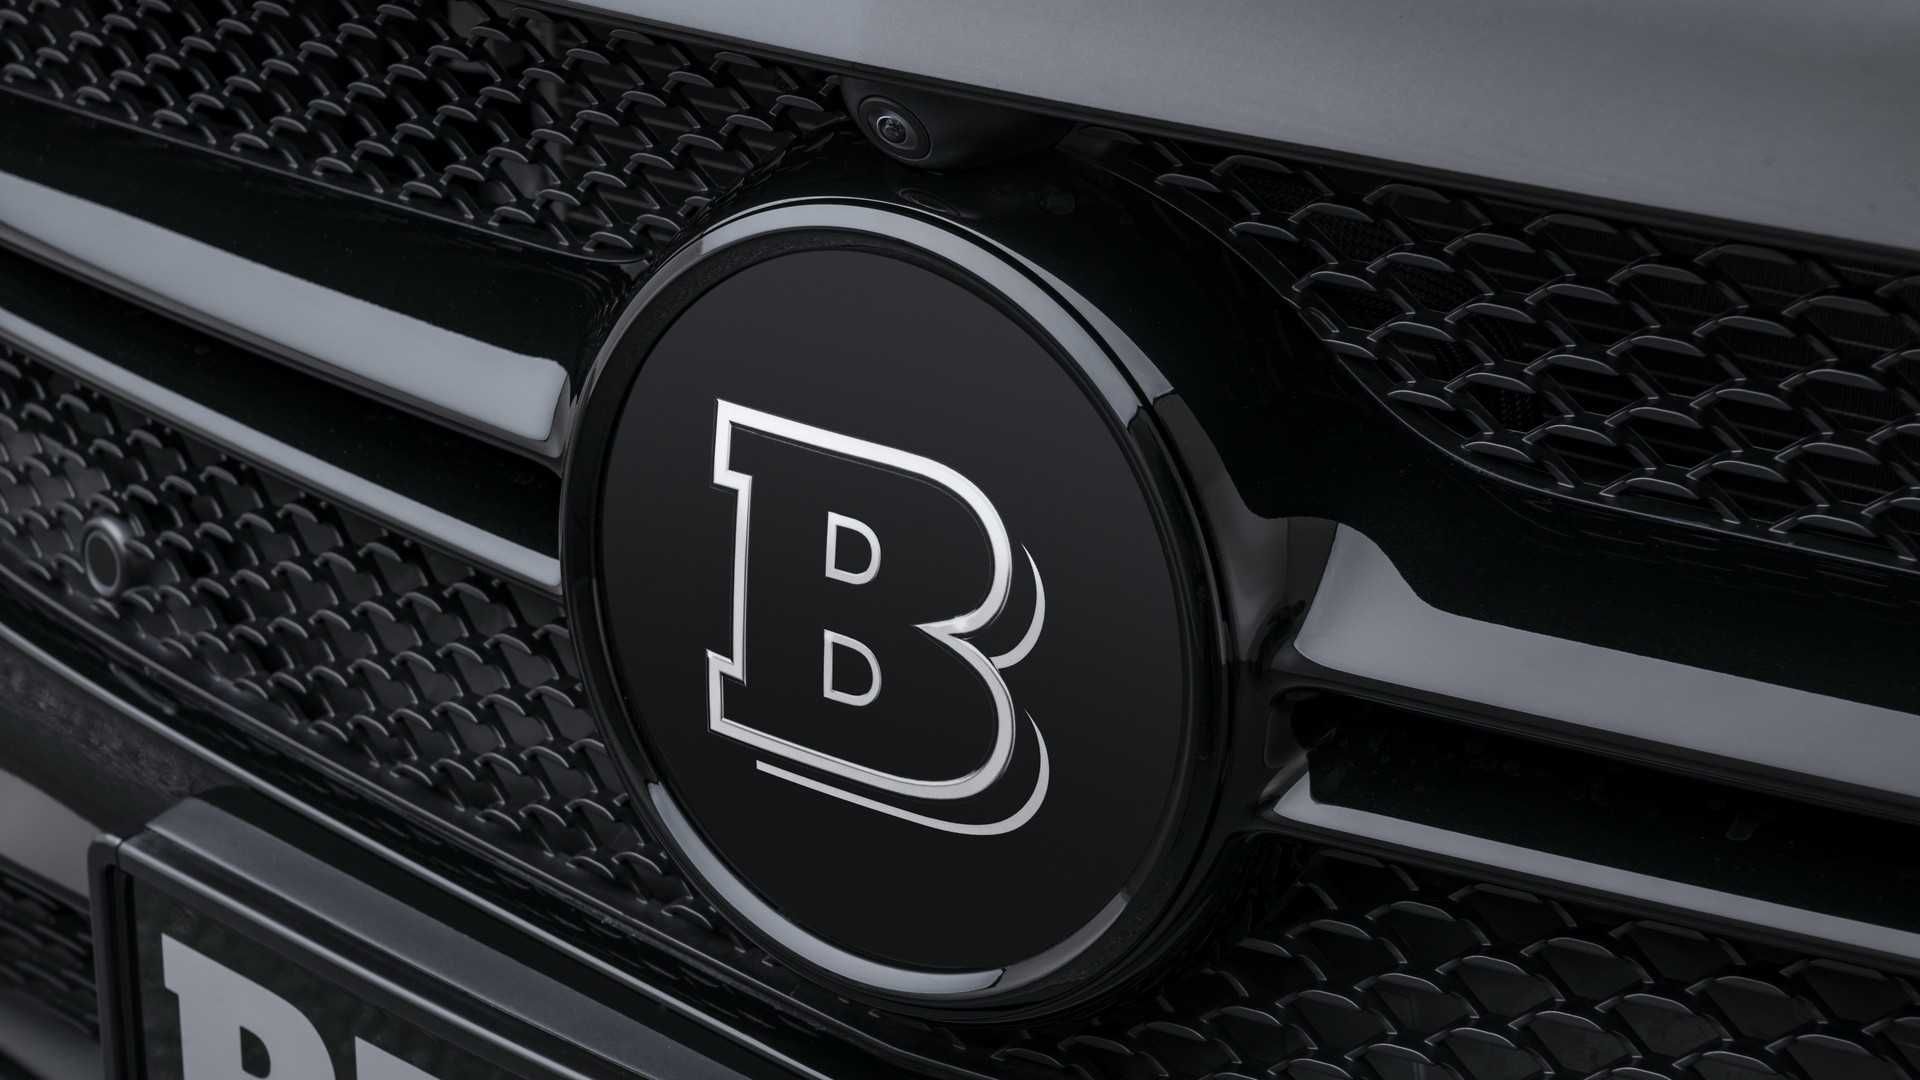 A Brief History Of Brabus: West Germany's Baddest Tuner